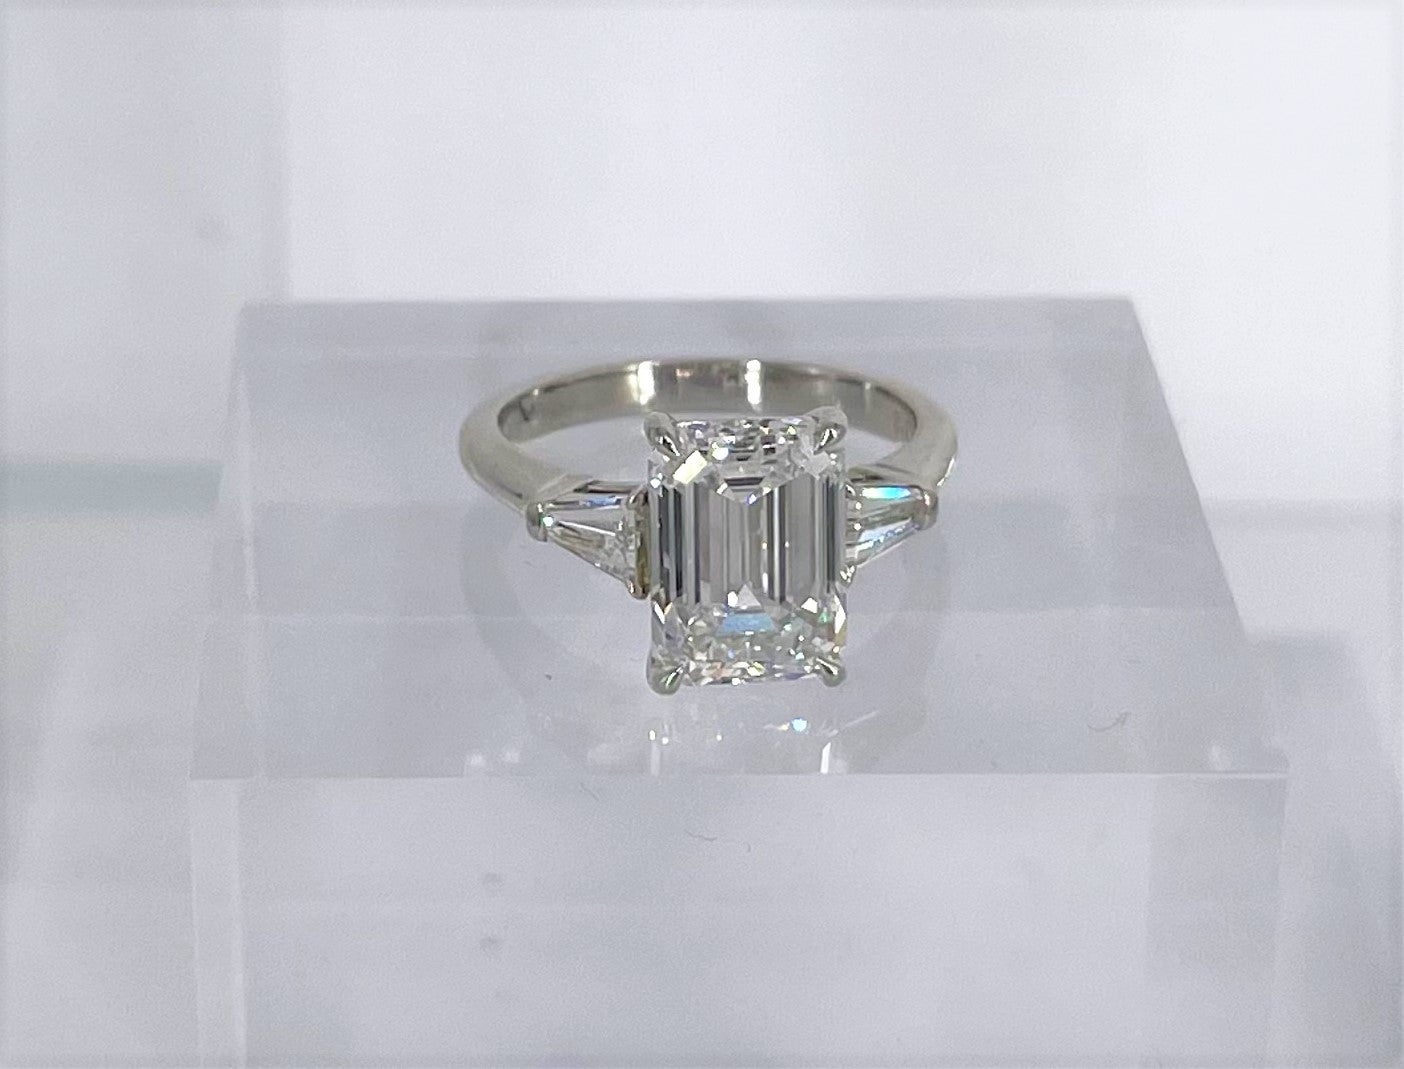 Timeless and chic, this emerald cut diamond engagement ring by Cartier is a tribute to Cartier's exquisite craftsmanship. The ring features a 3.60 carat emerald cut diamond certified by GIA to be E color and VVS2 clarity. The emerald cut is